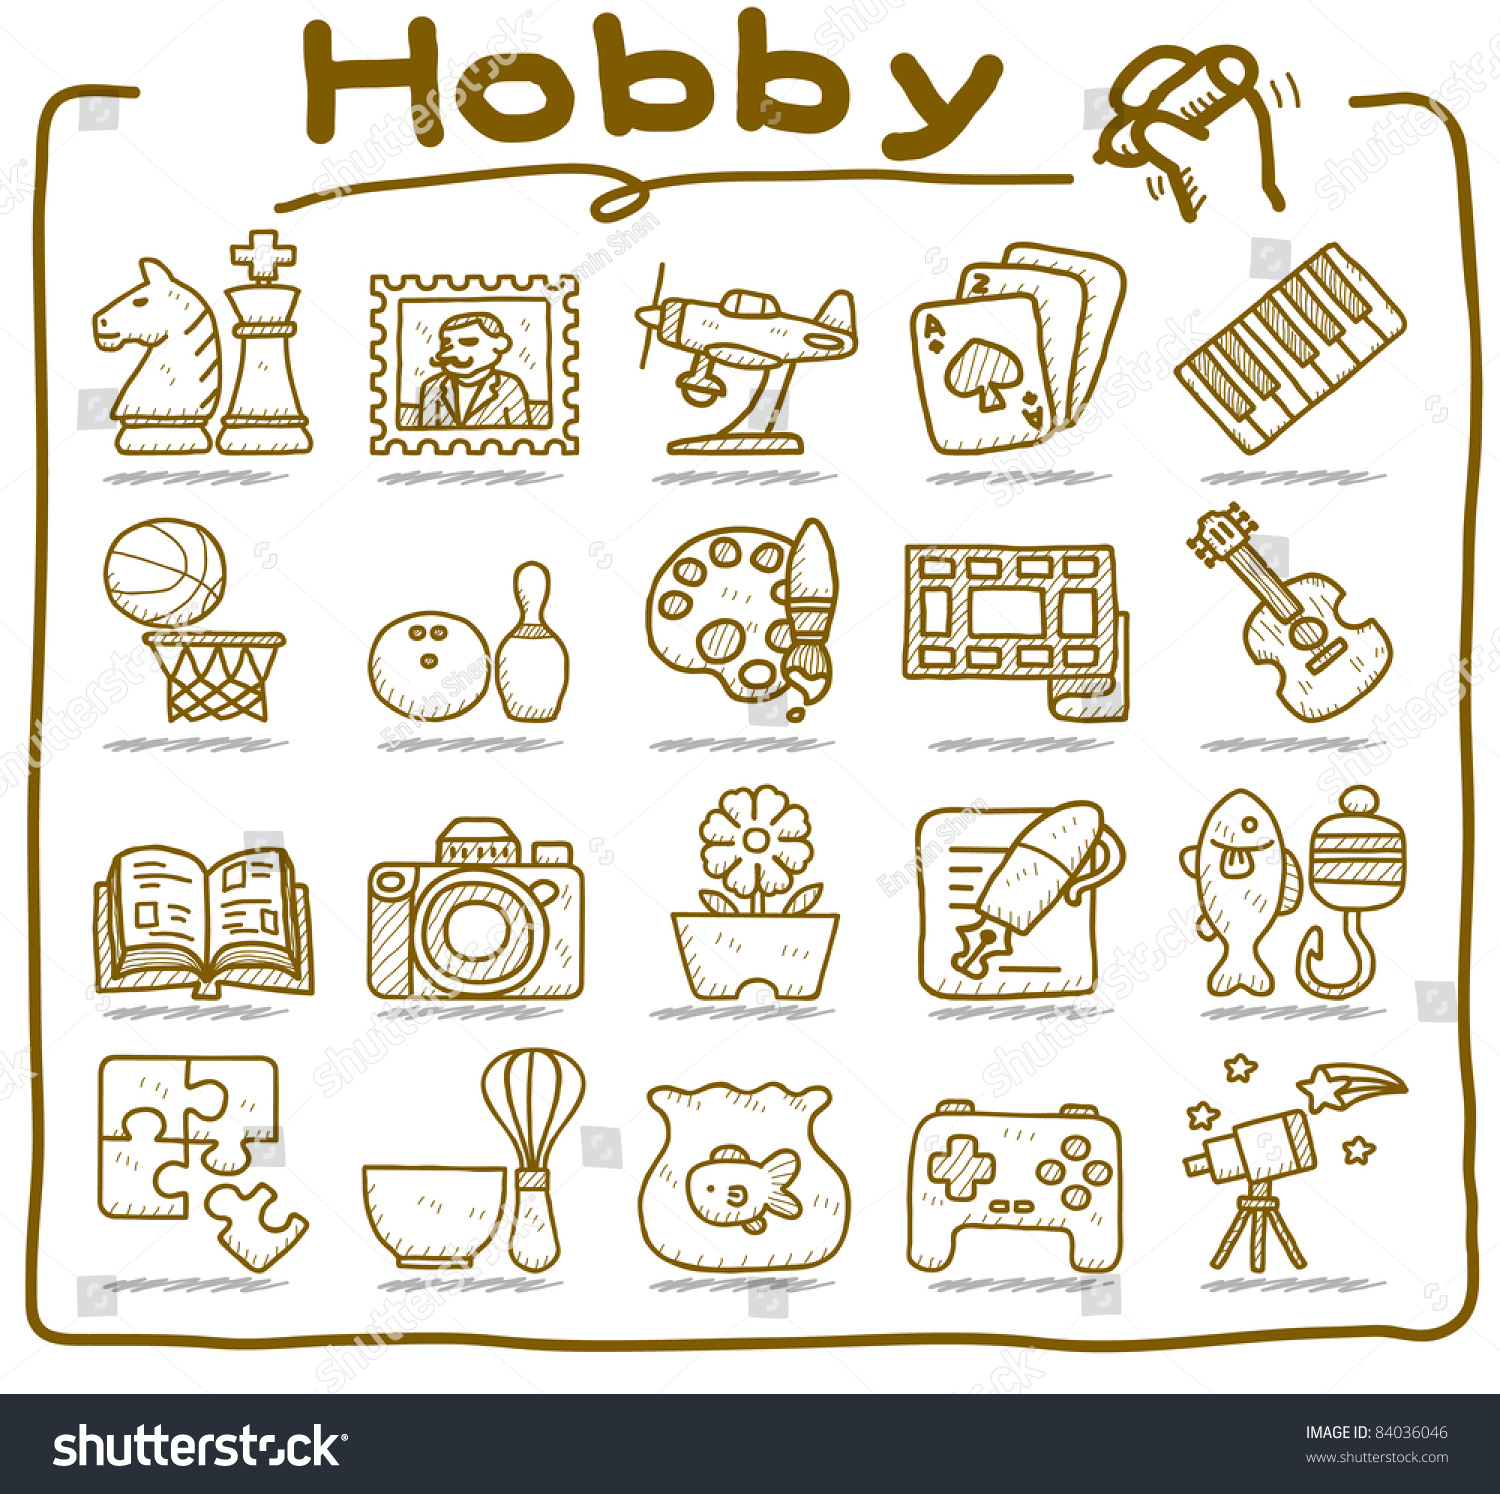 stock-vector-pure-series-hand-drawn-hobby-leisure-and-holiday-icons-84036046.jpg